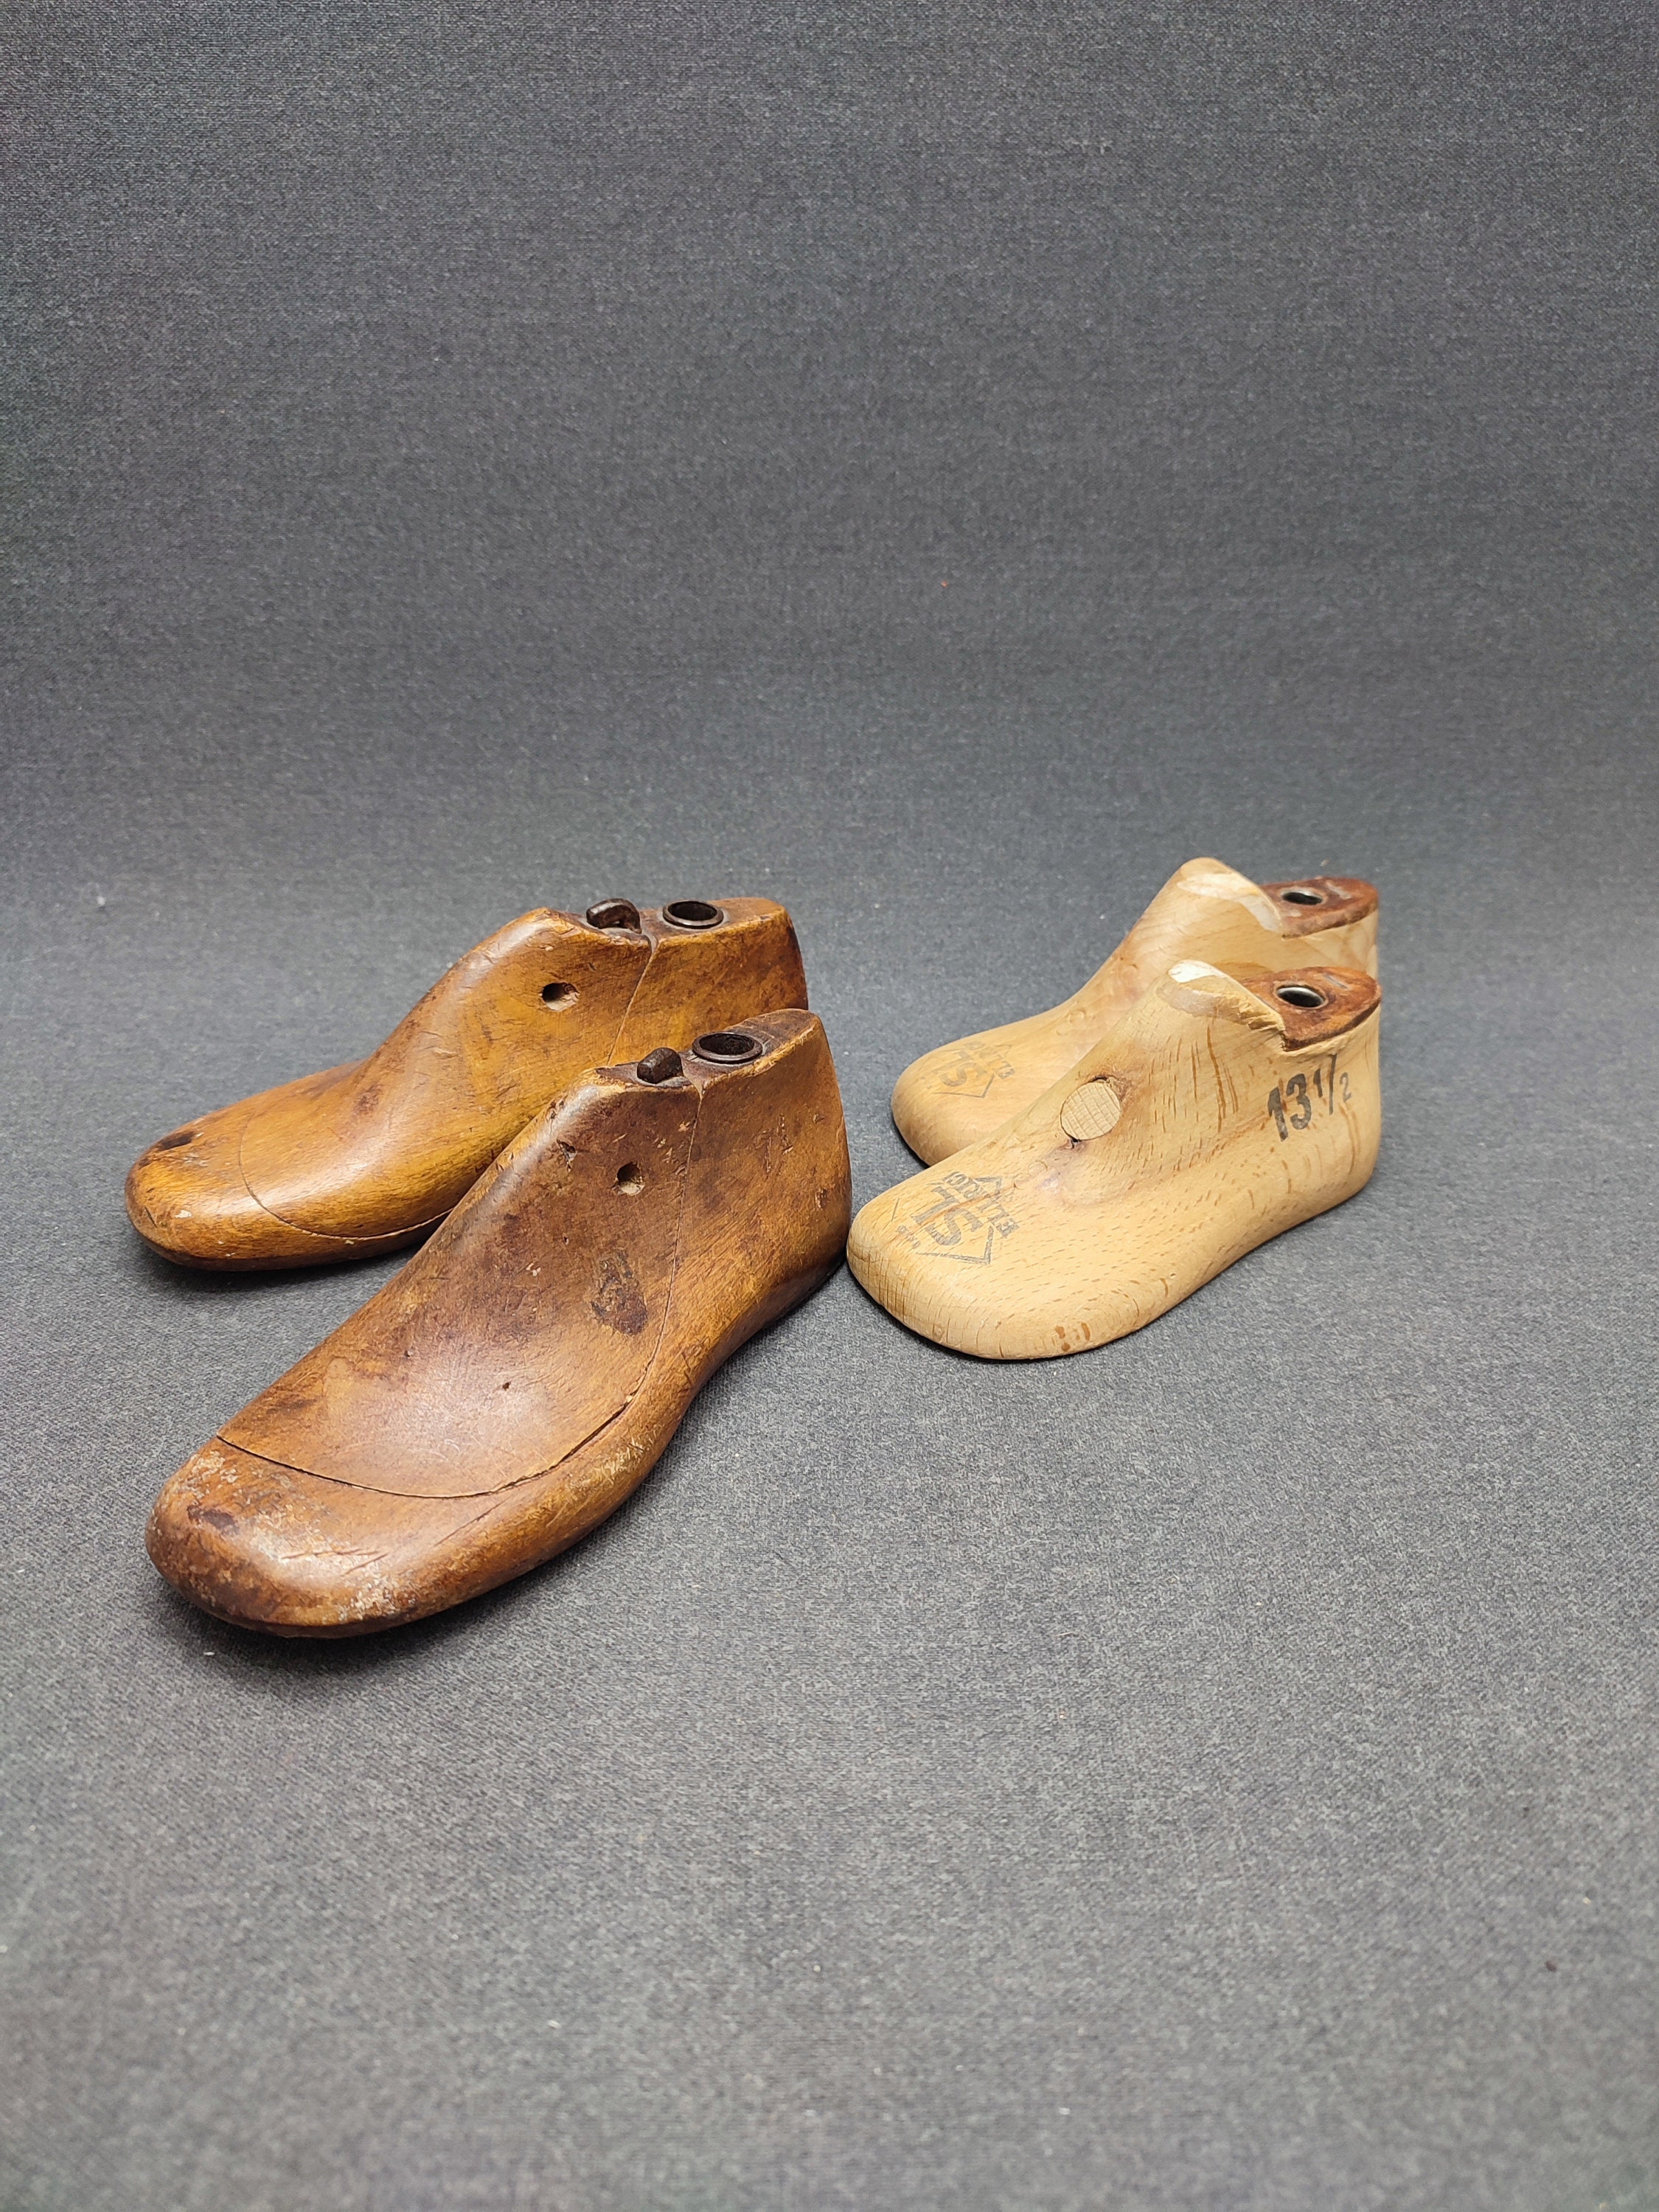 Lot of Four Handmade Leather Folklore Shoes, Antique and Primitive Leather  Shoes -  Norway